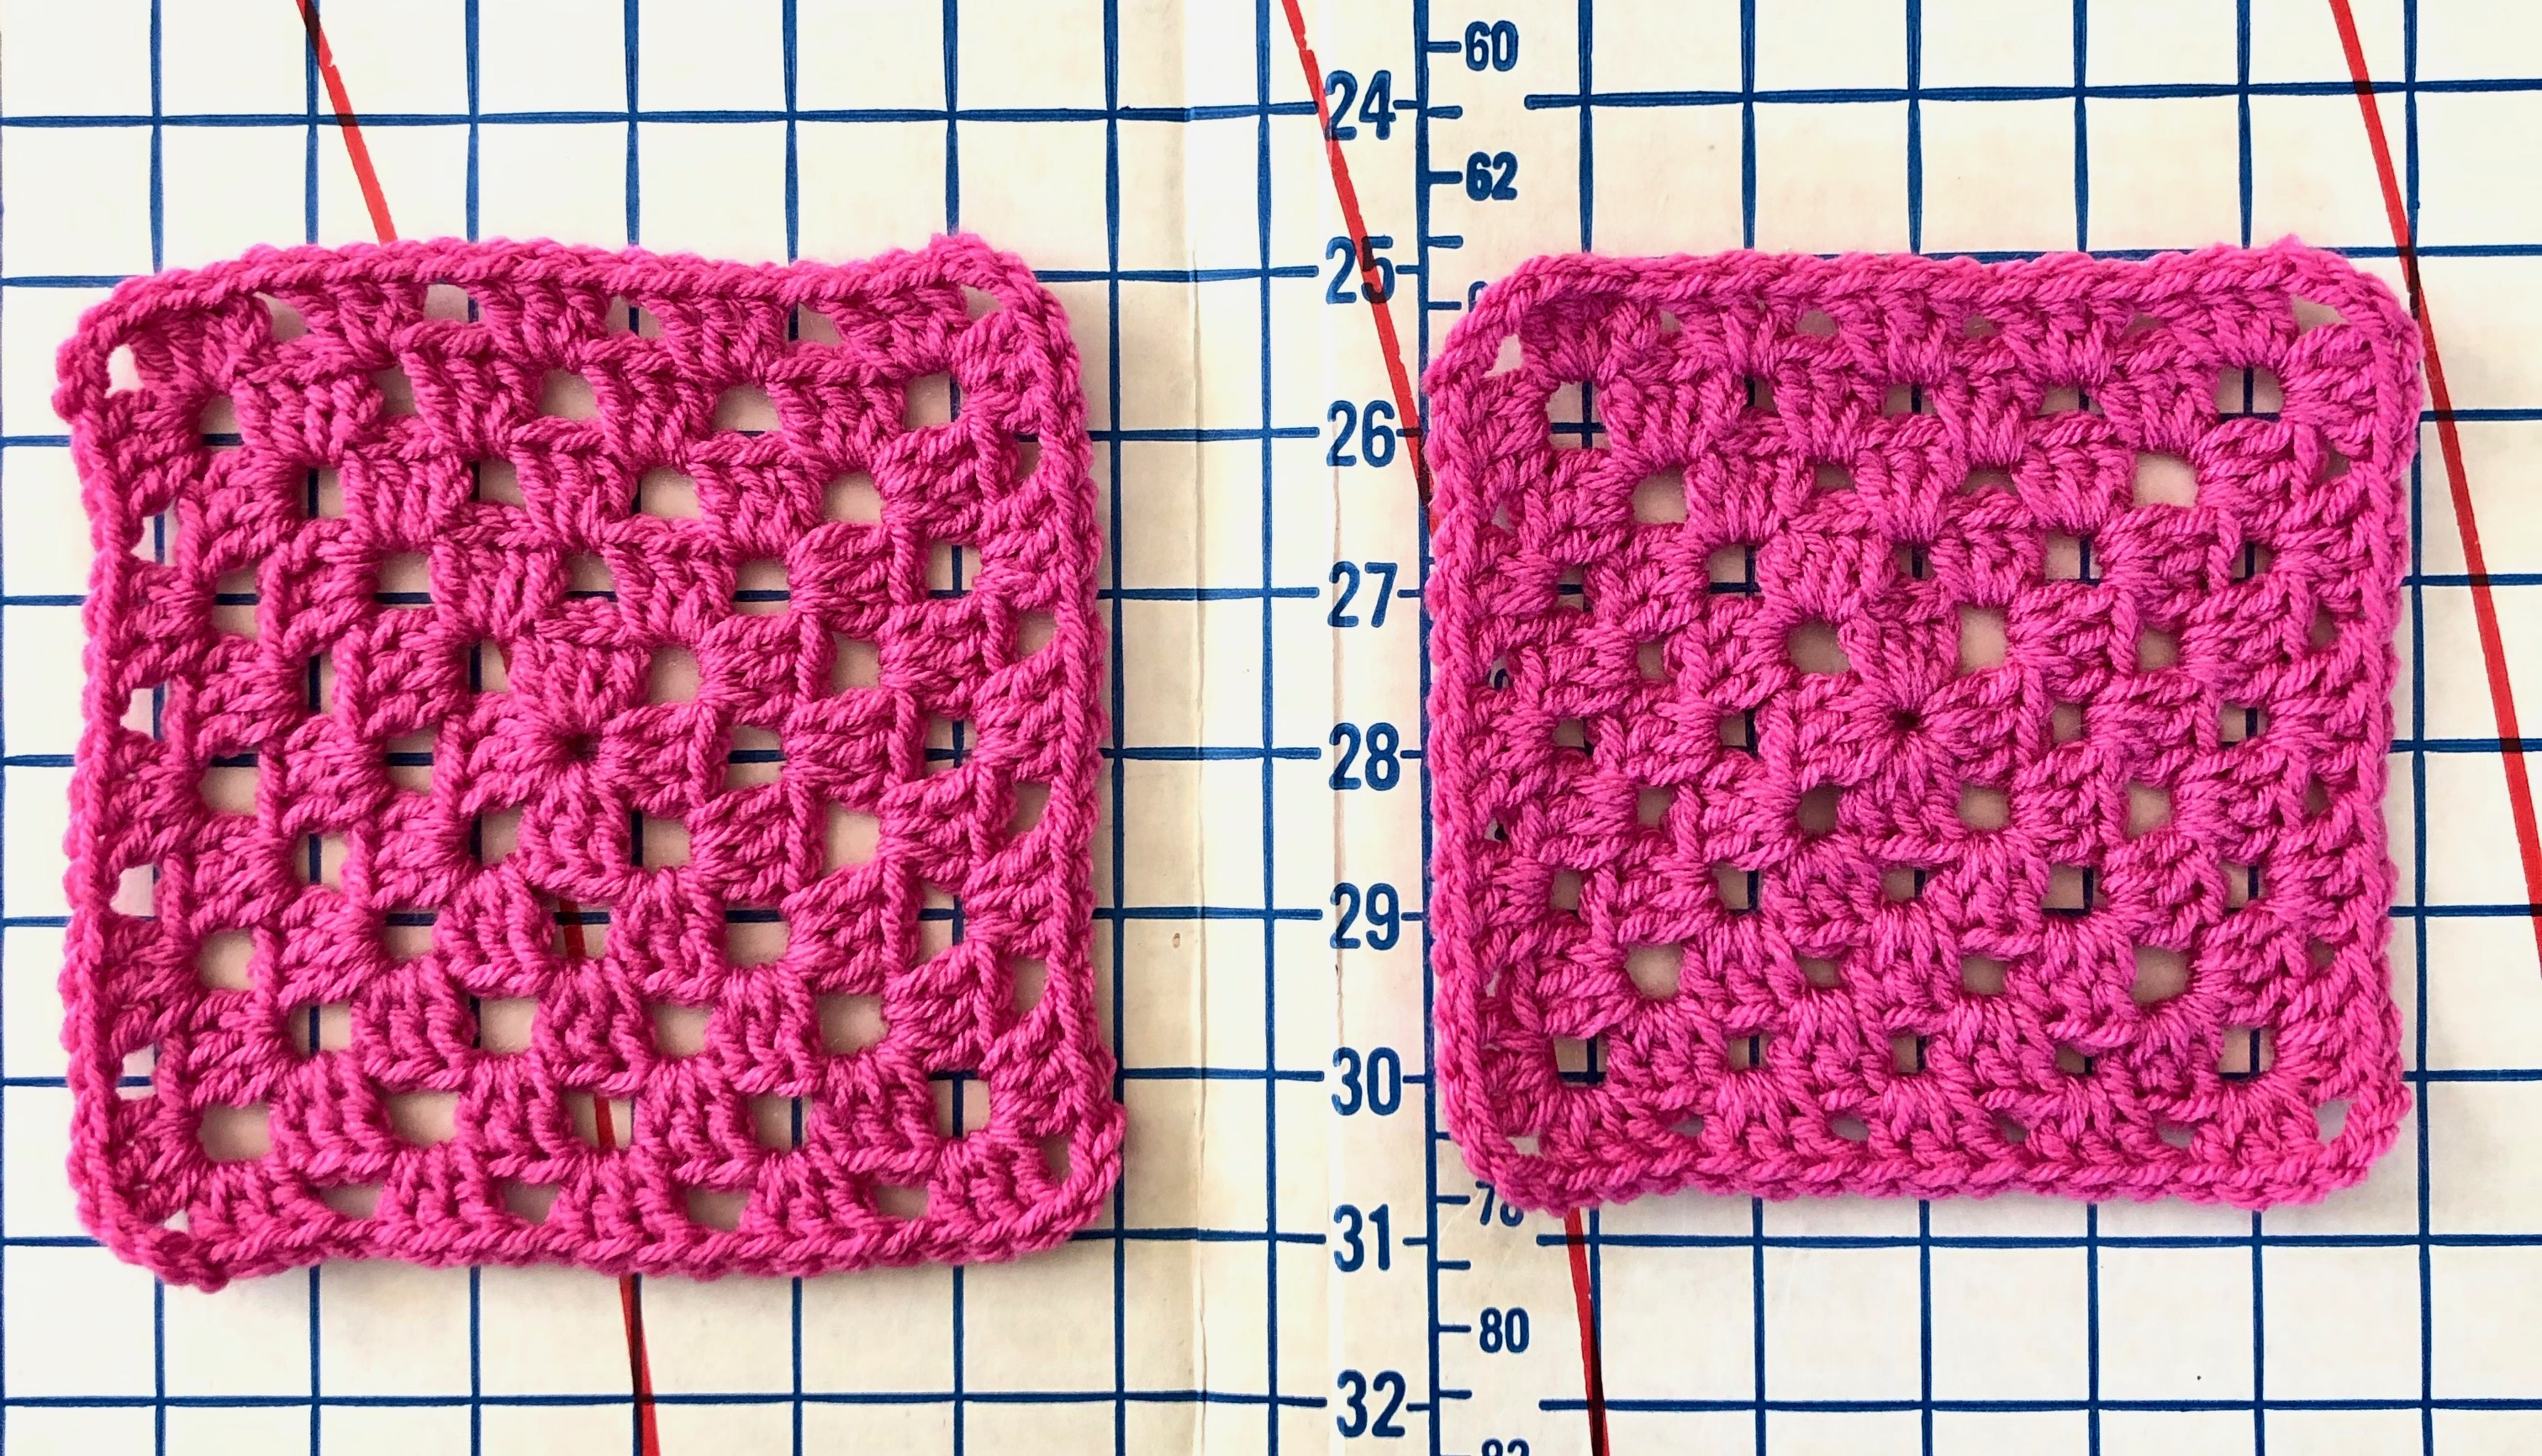 Comparison of Different Ways to Crochet Granny Squares